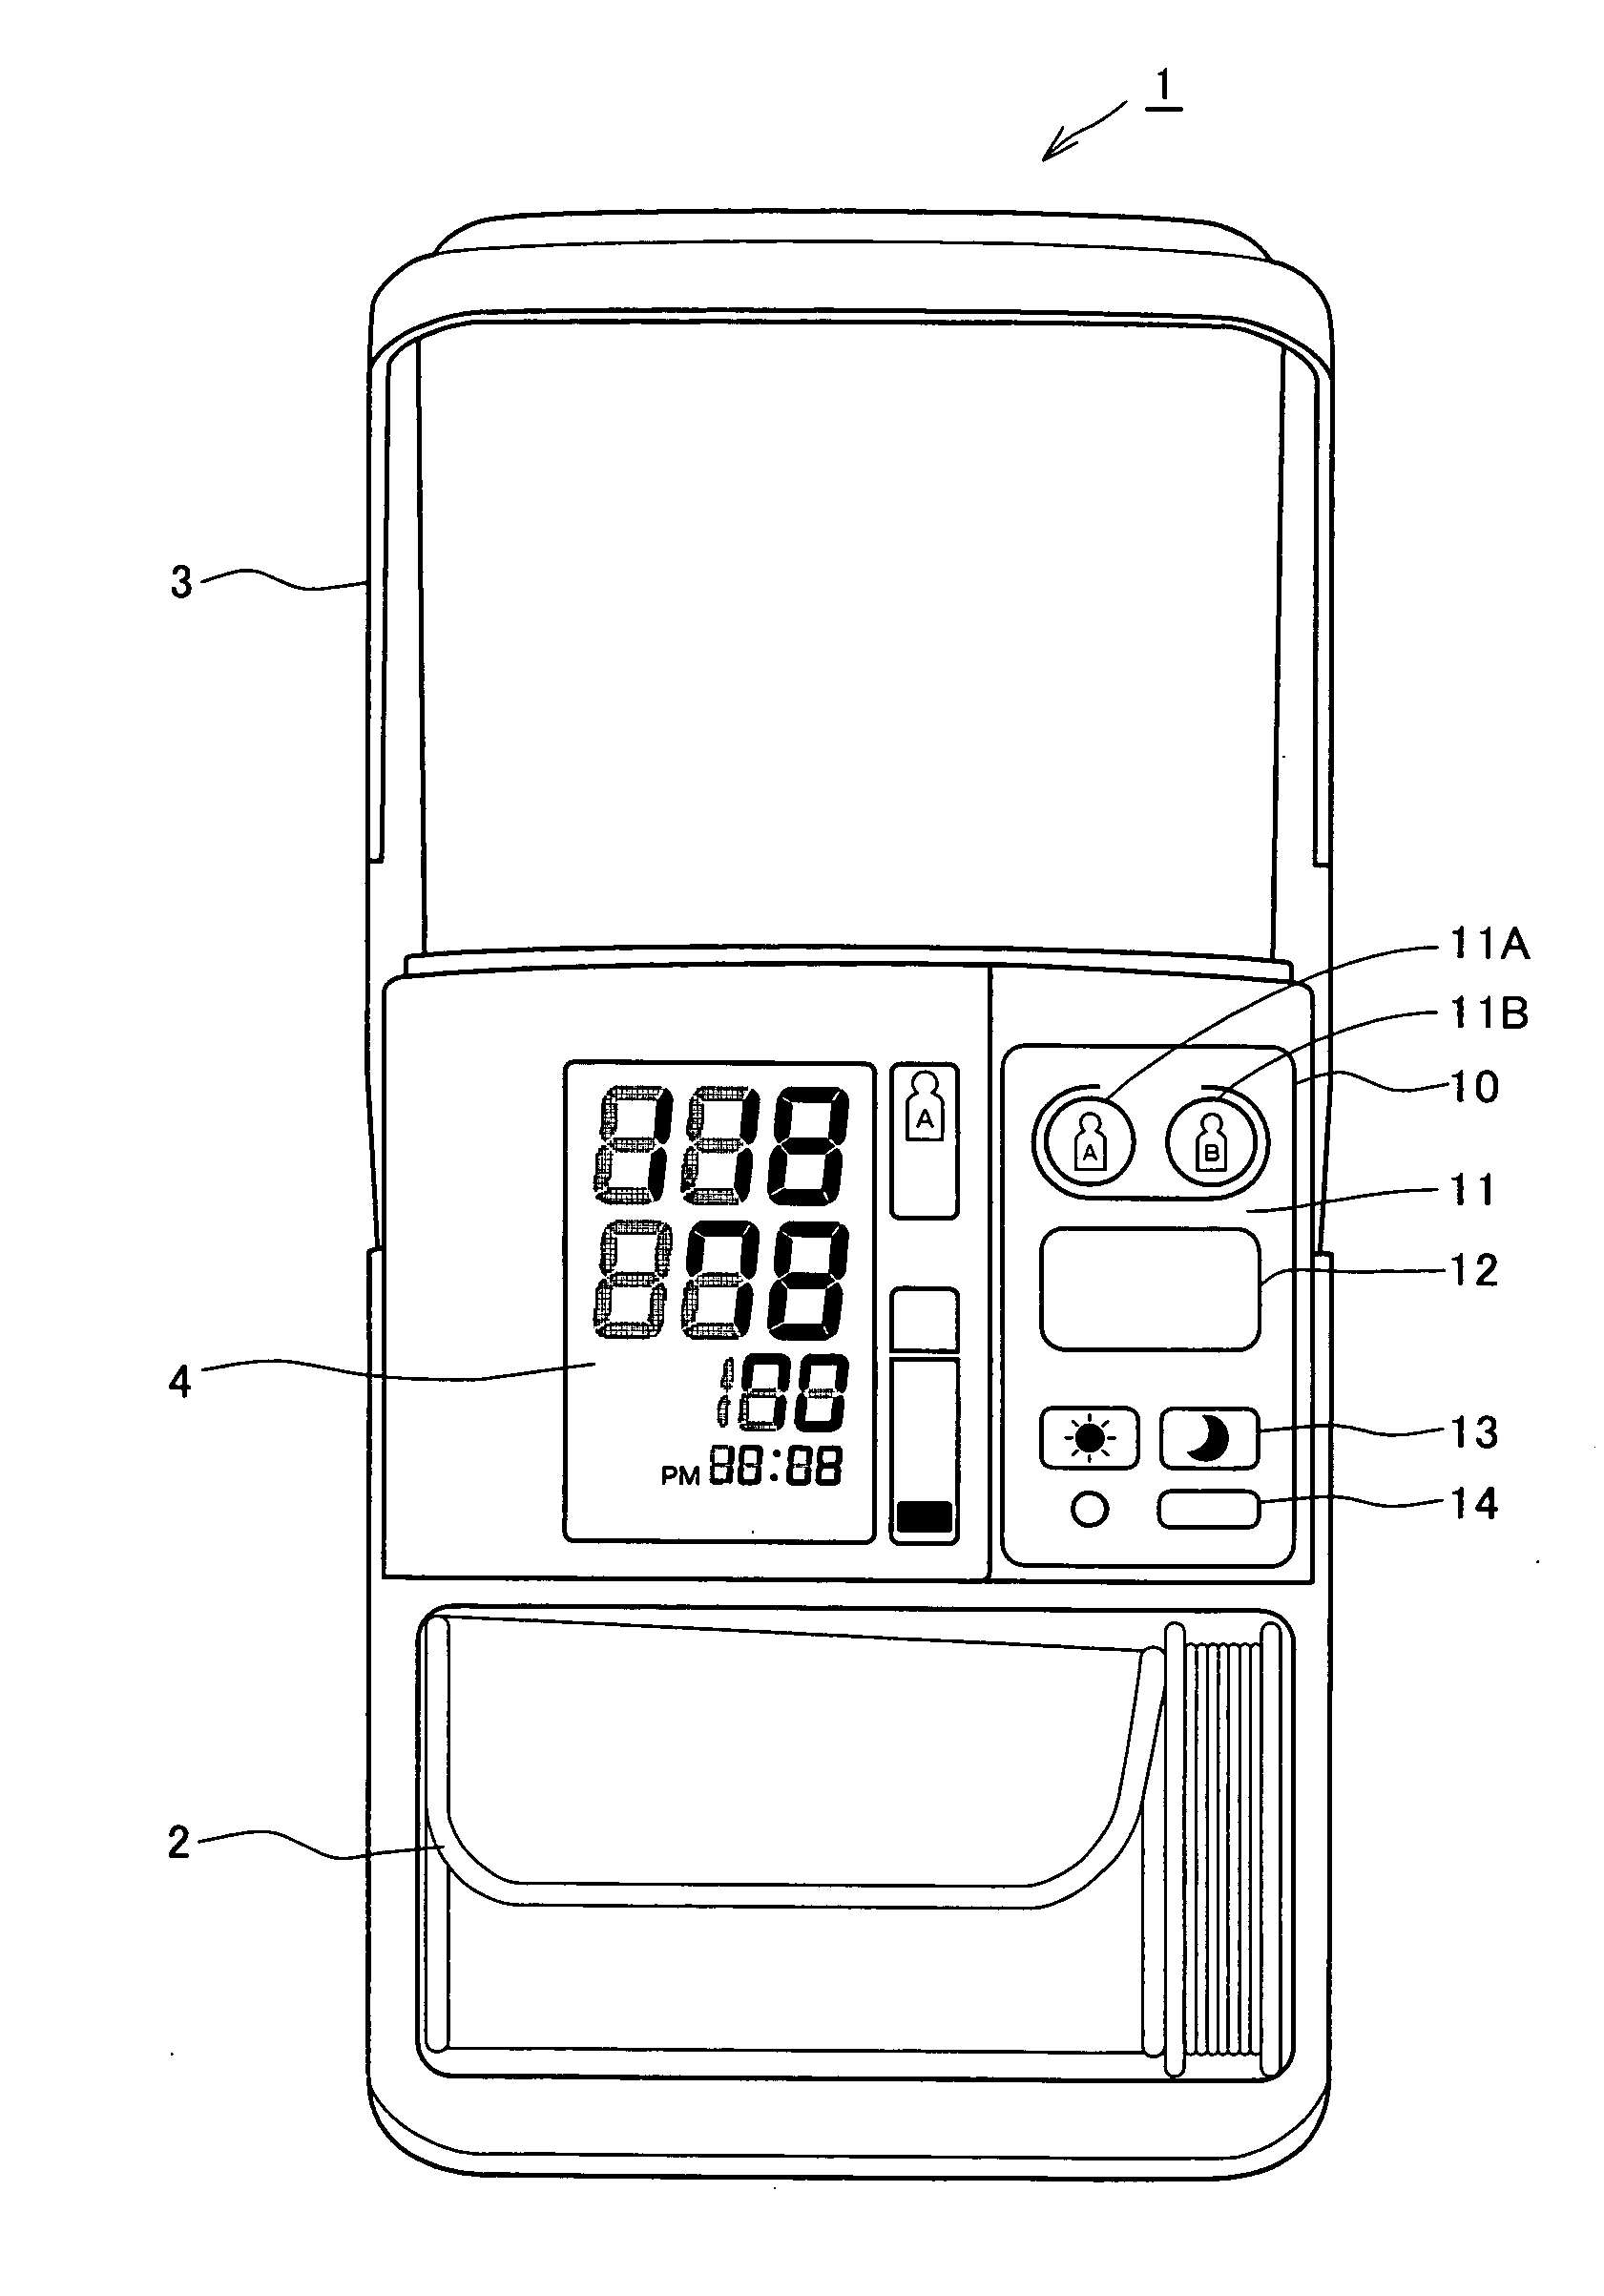 Blood pressure monitor capable of managing measurement value of multiple users